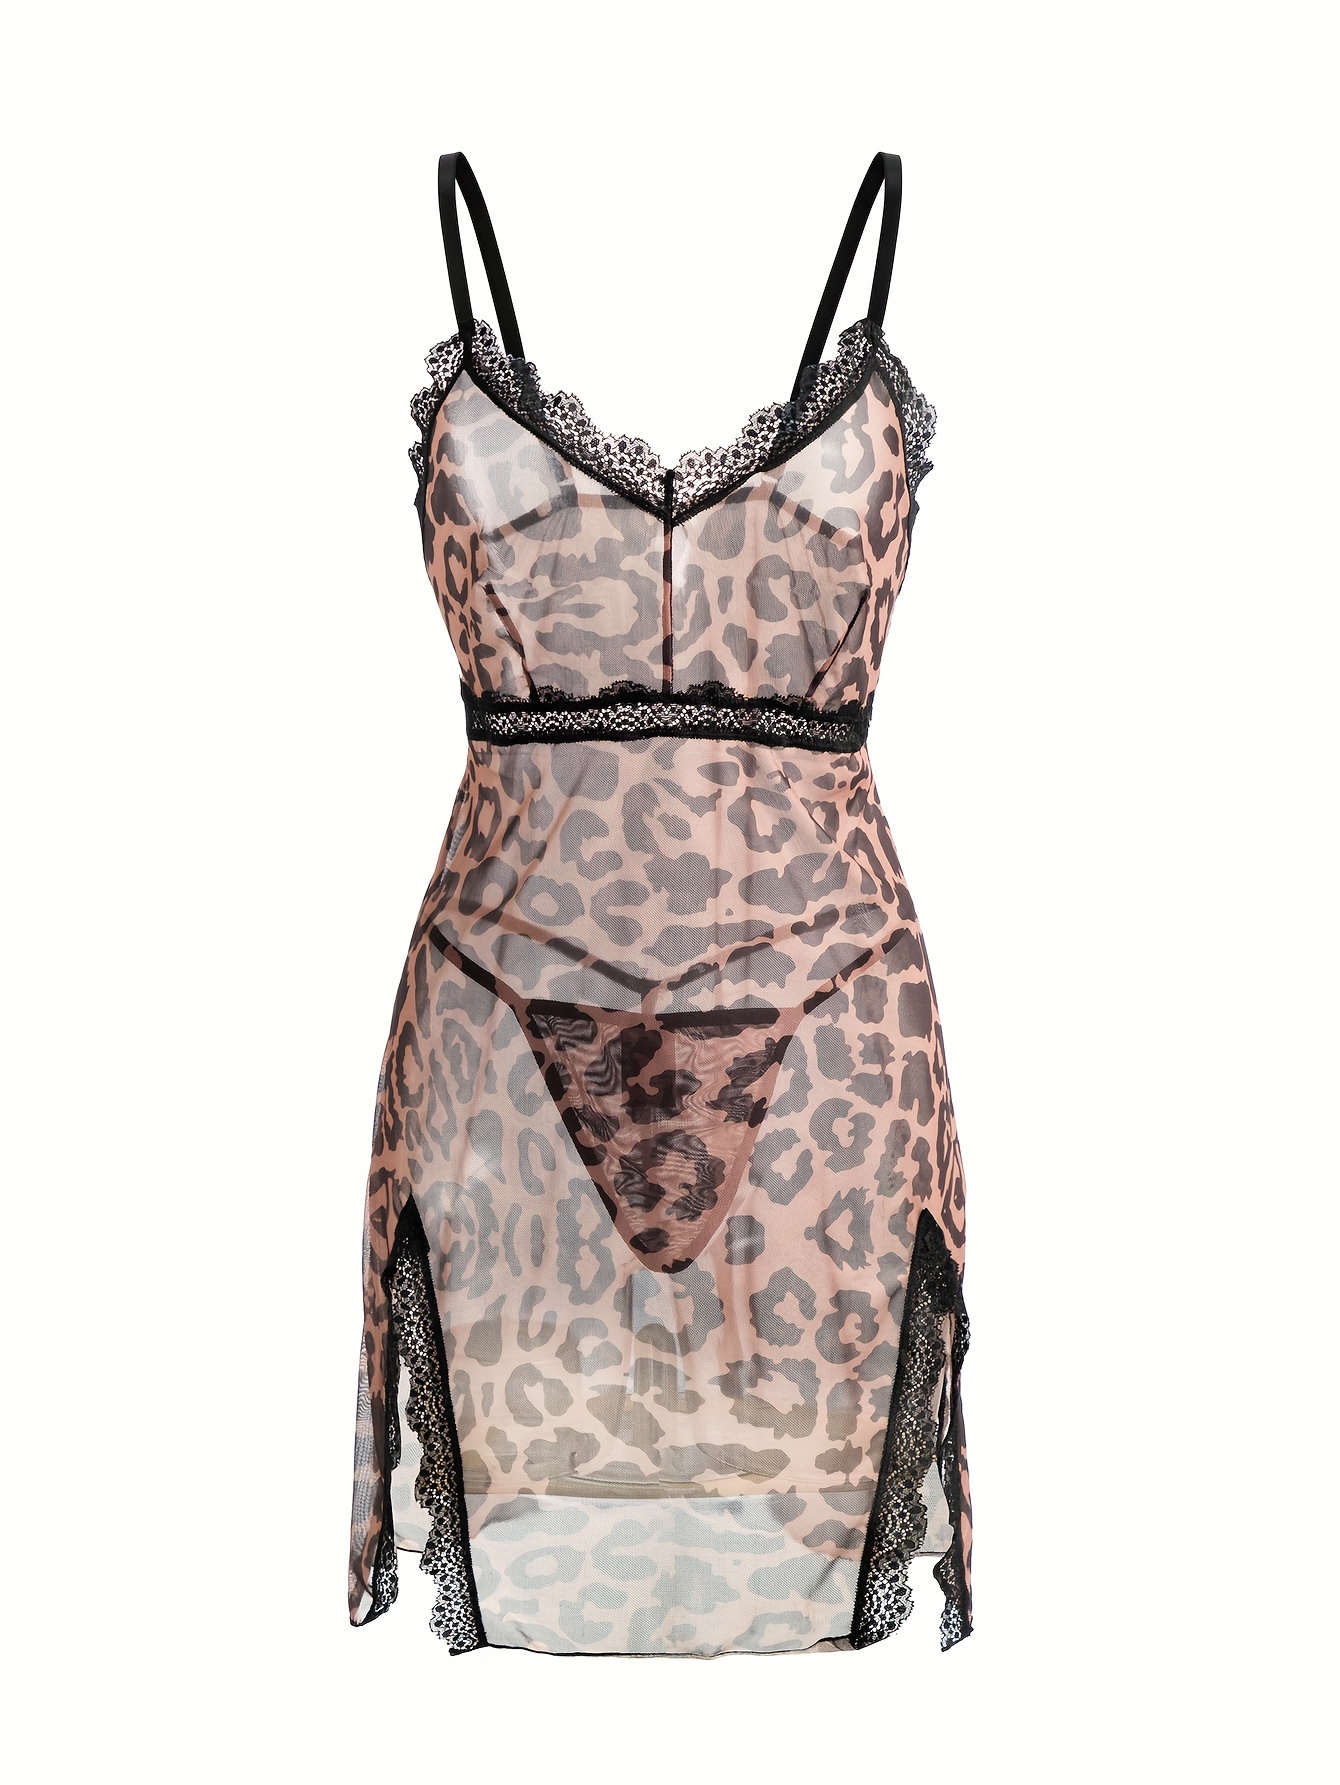 Sexy plus size nightgown in leopard print and black lace